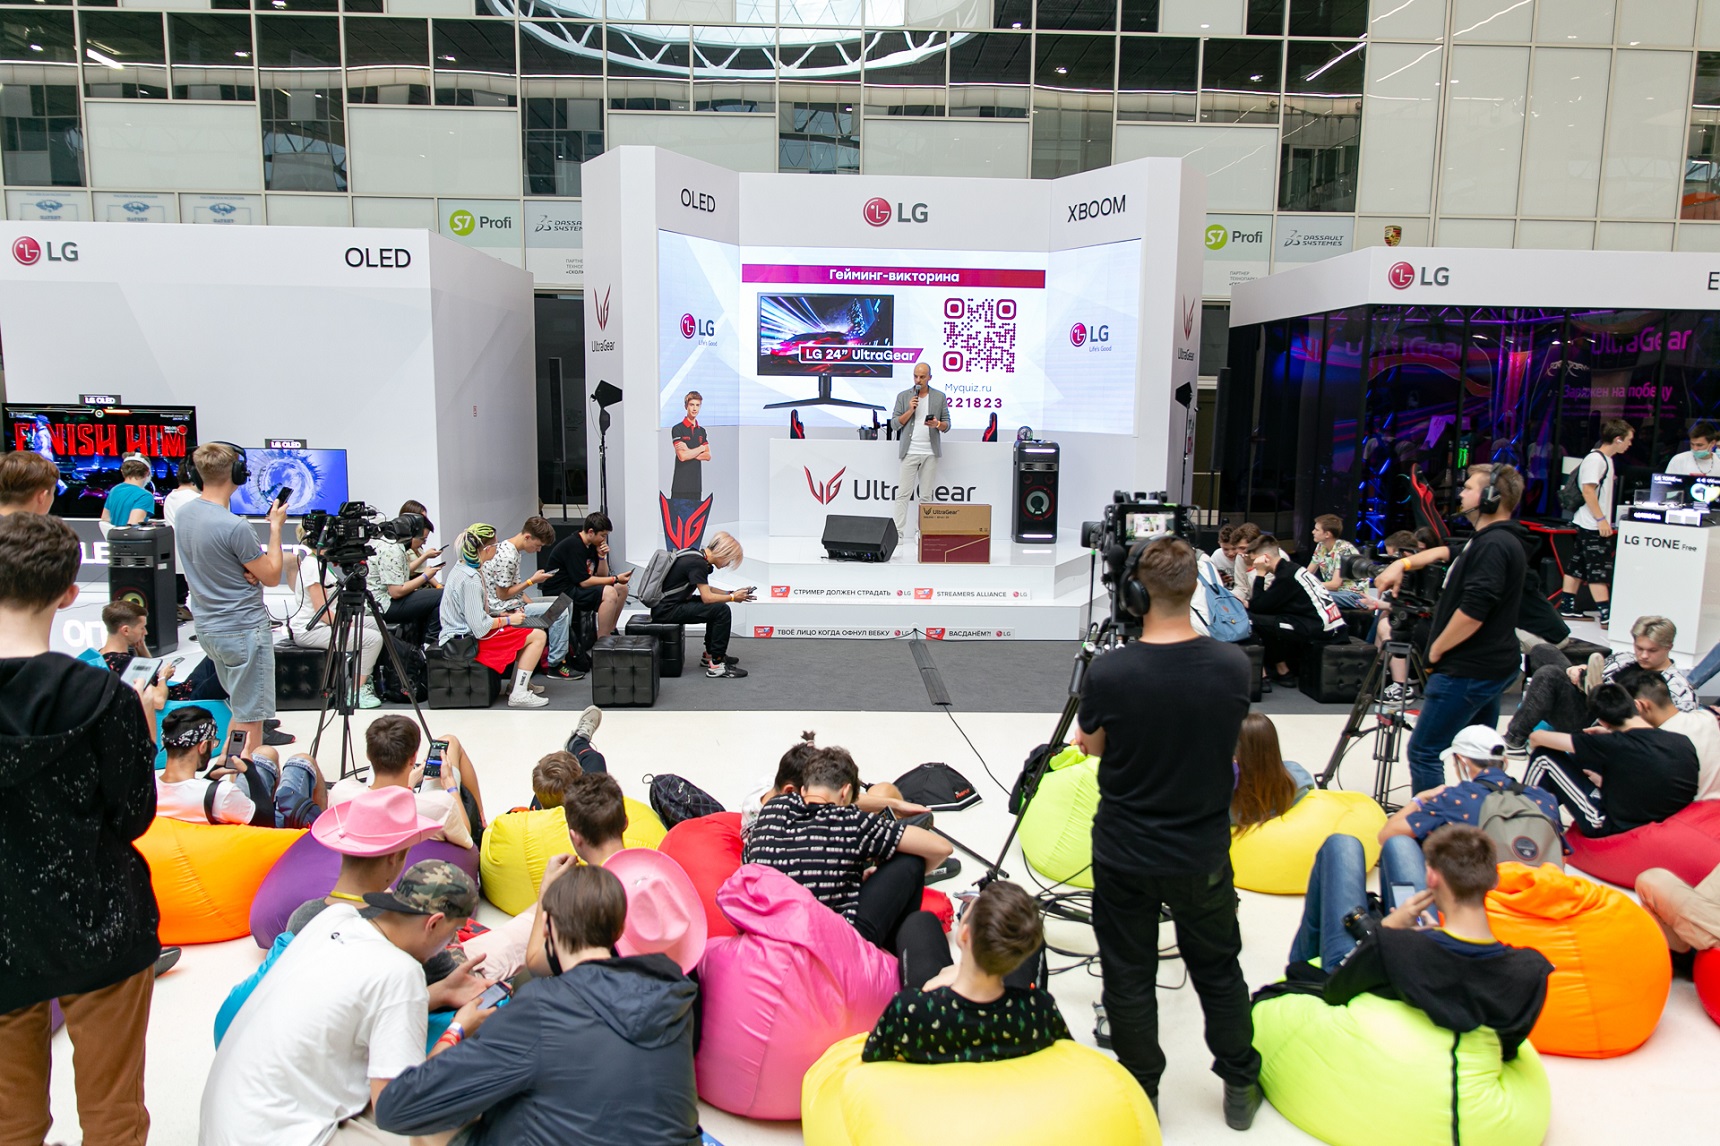 A large audience watches on as an LG representative makes a speech at the LG Electronics booth during Streamfest 2021.